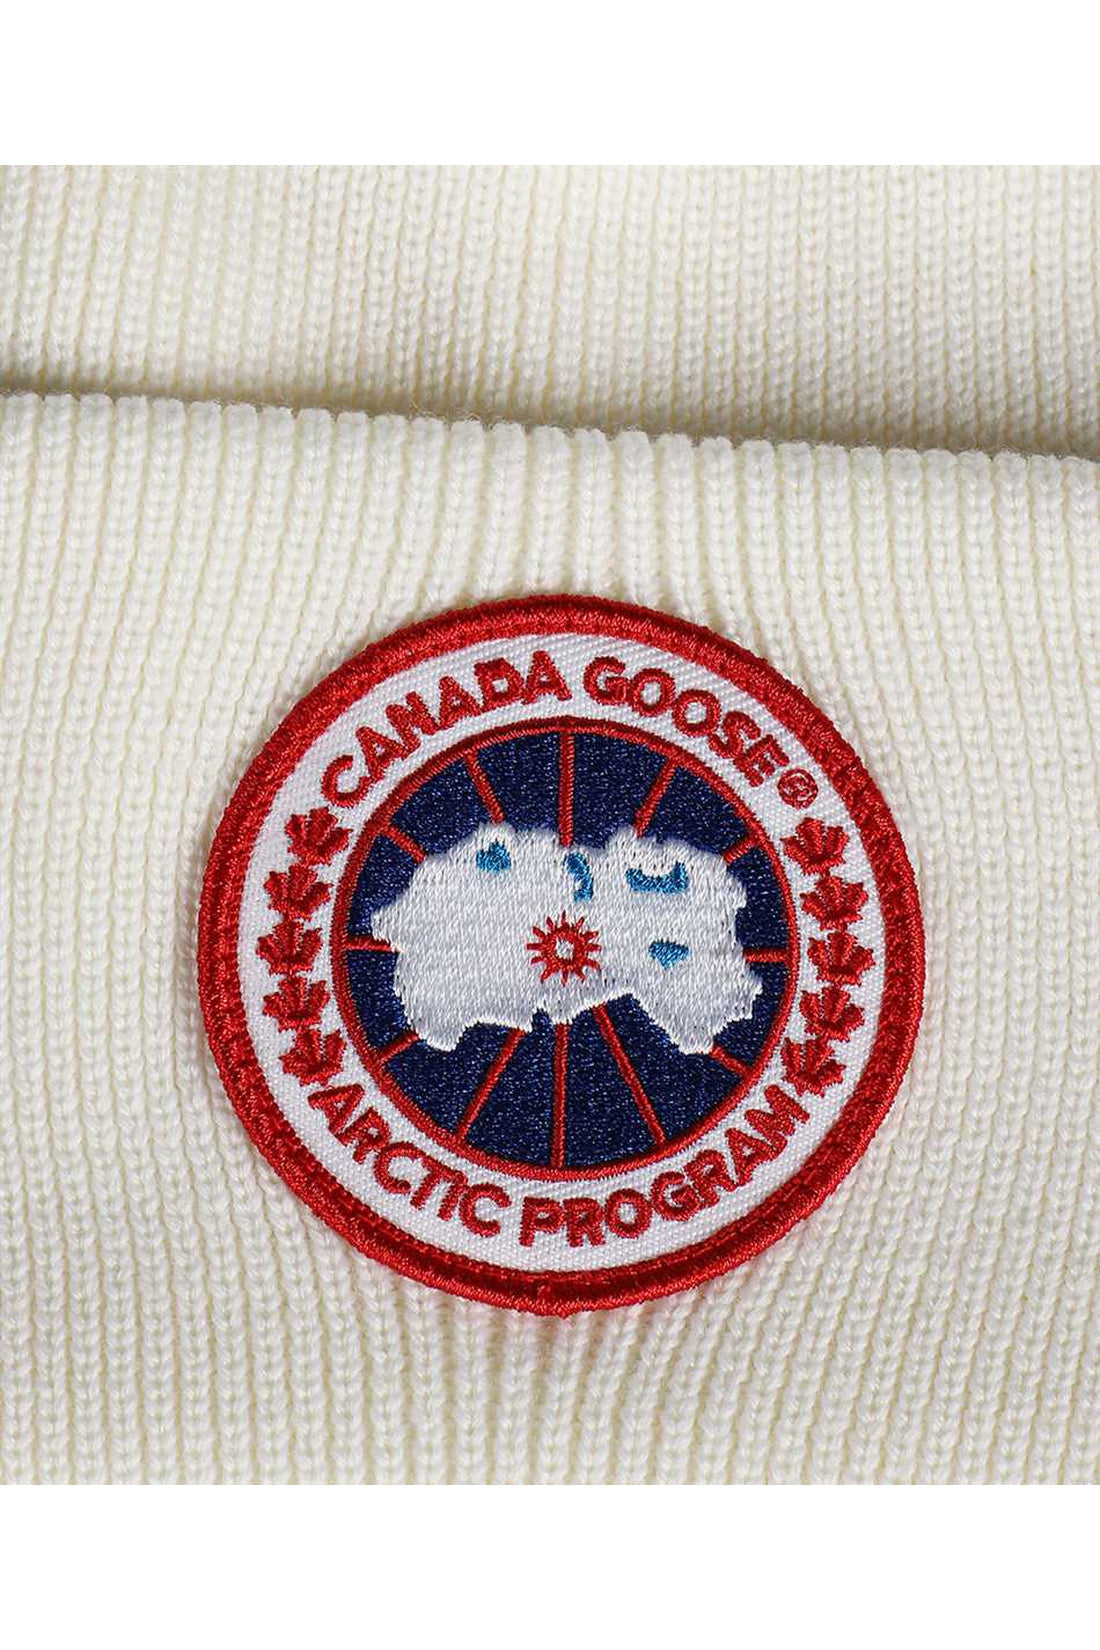 Canada Goose-OUTLET-SALE-Merino wool hat-ARCHIVIST